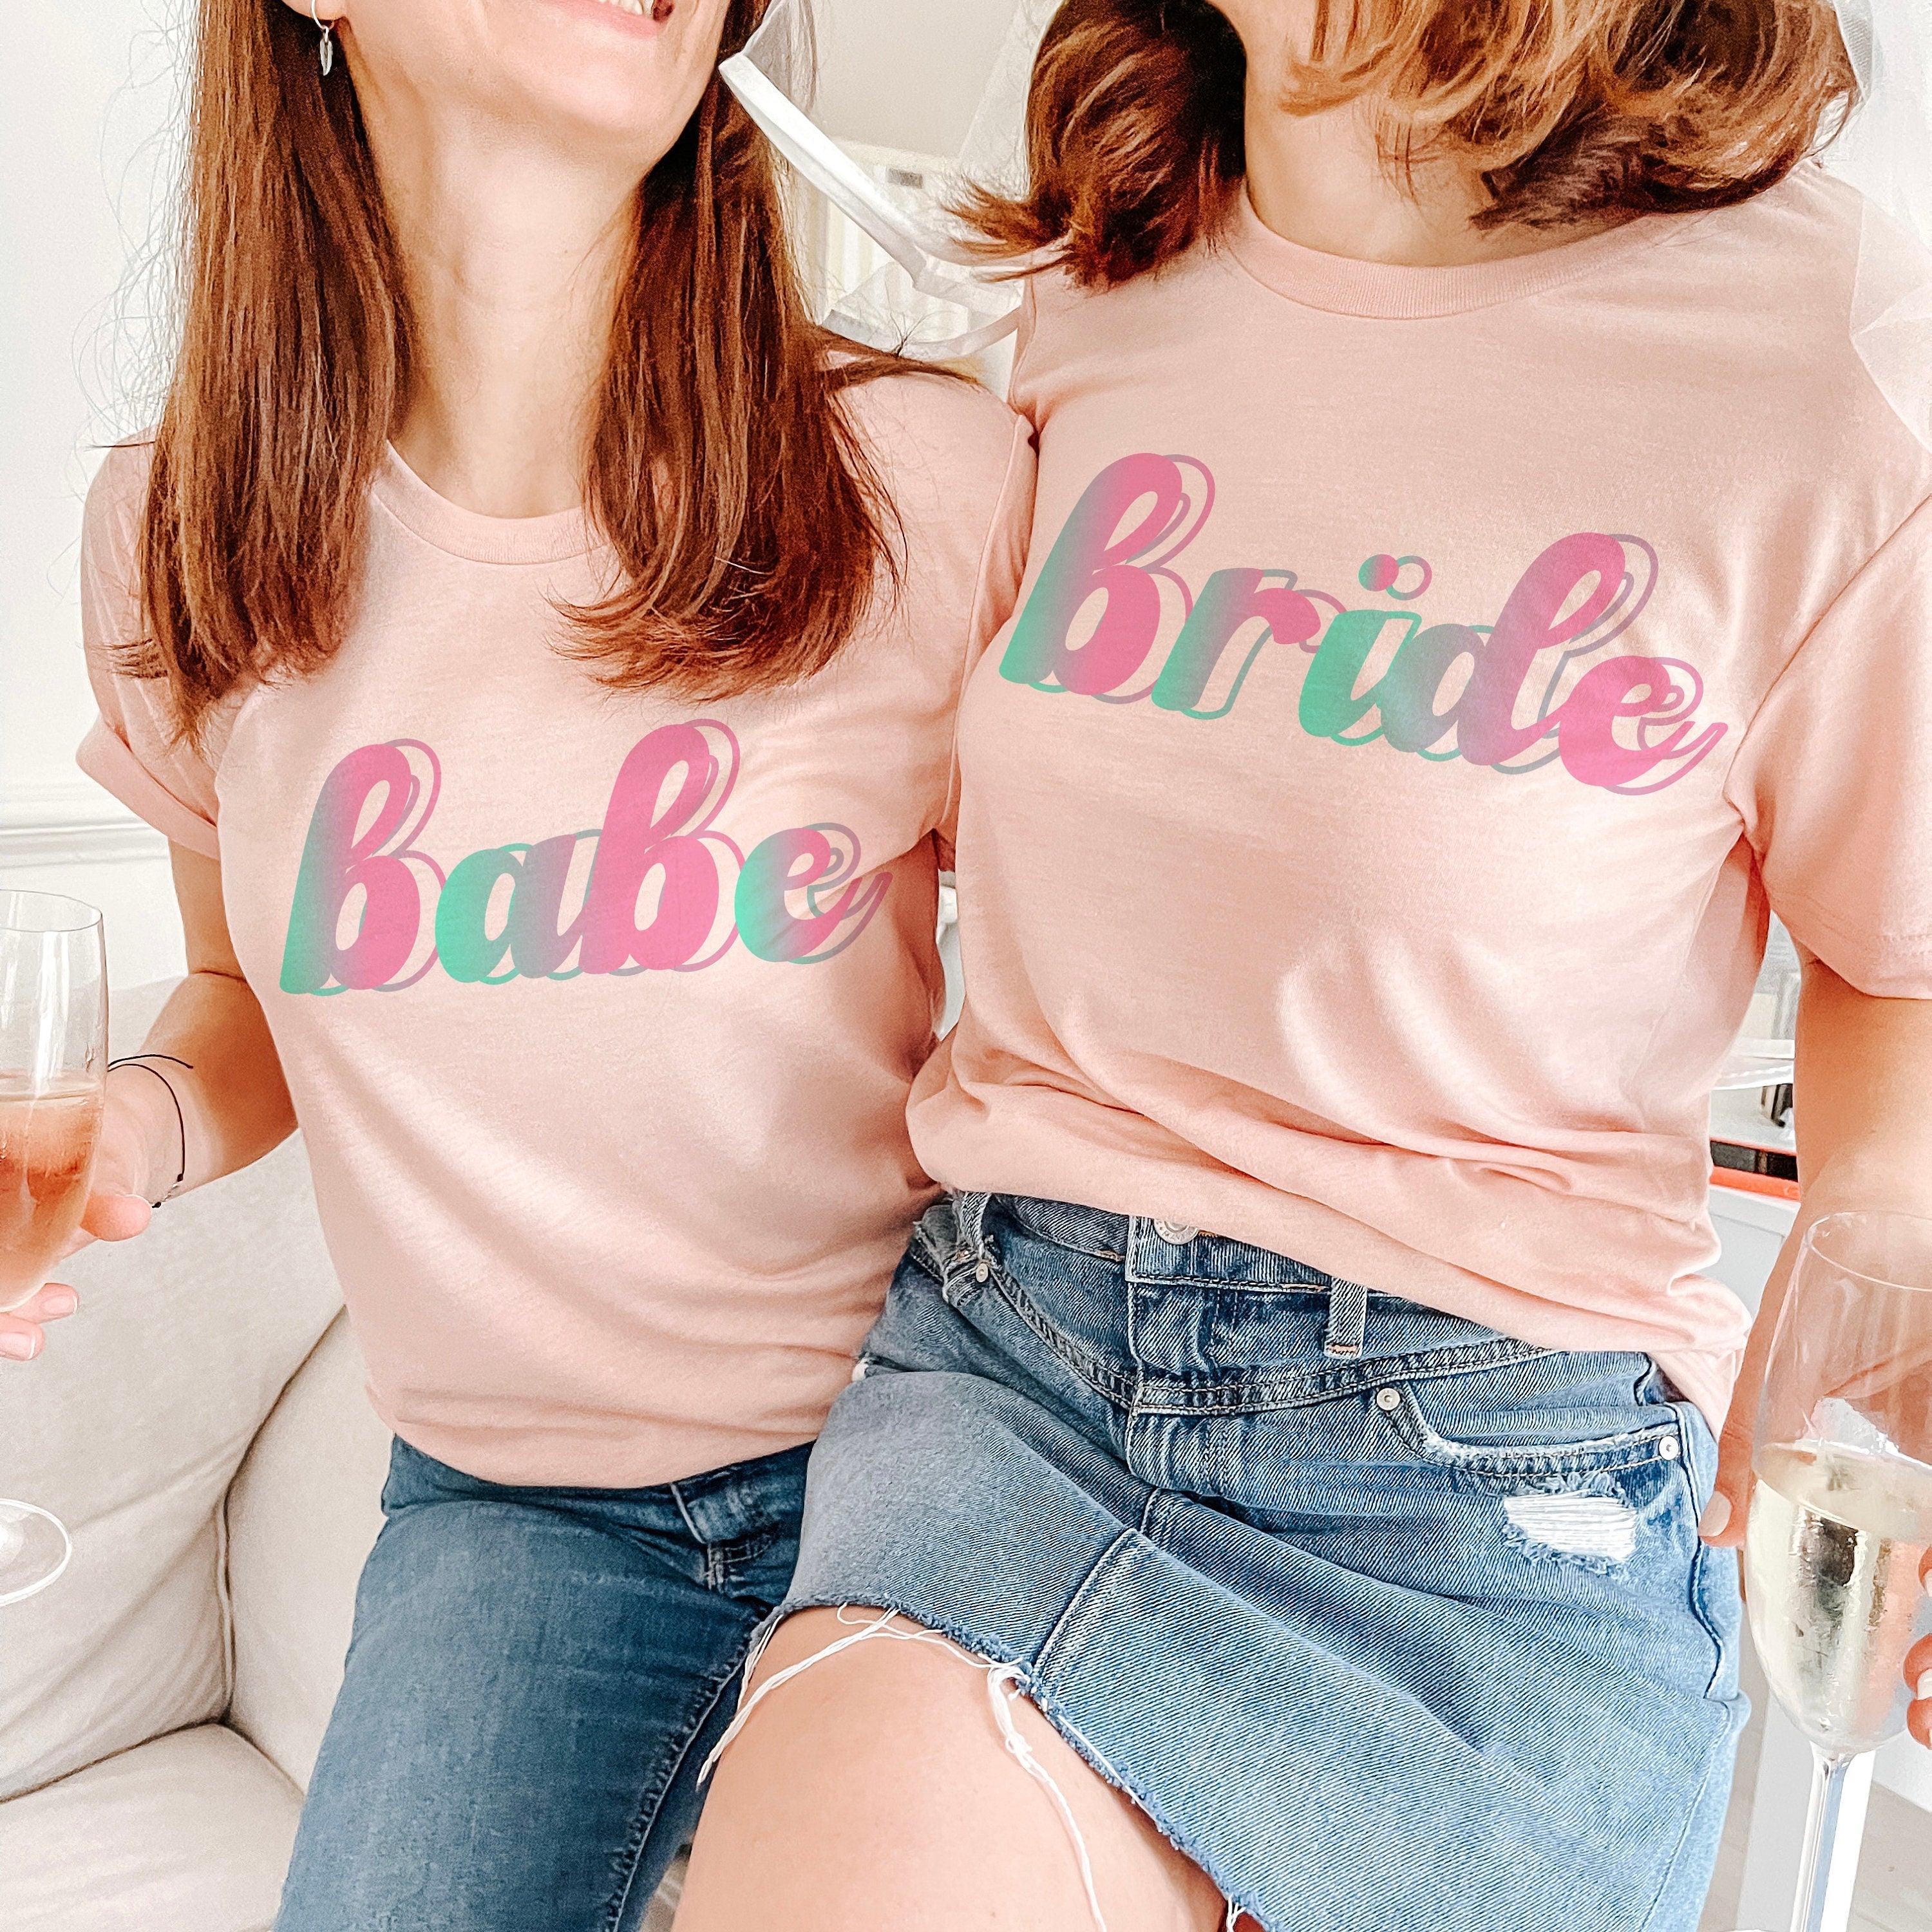 Bride And Babe T-Shirt, Cute Bridal Party, Hen Party, Bachelorette Top